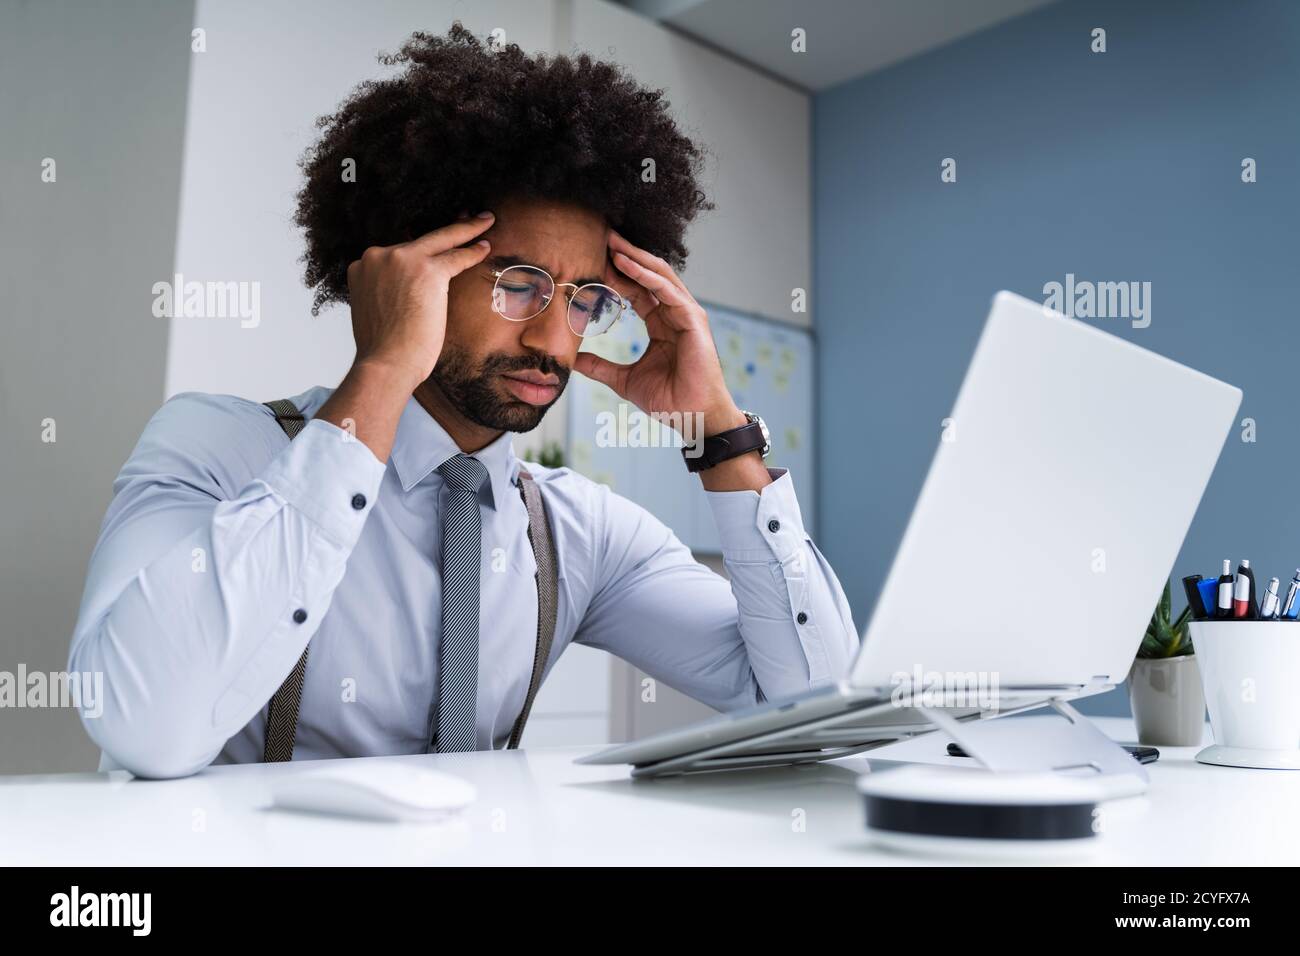 African Business Man Upset And Worry Or Bored Or Stressed Stock Photo